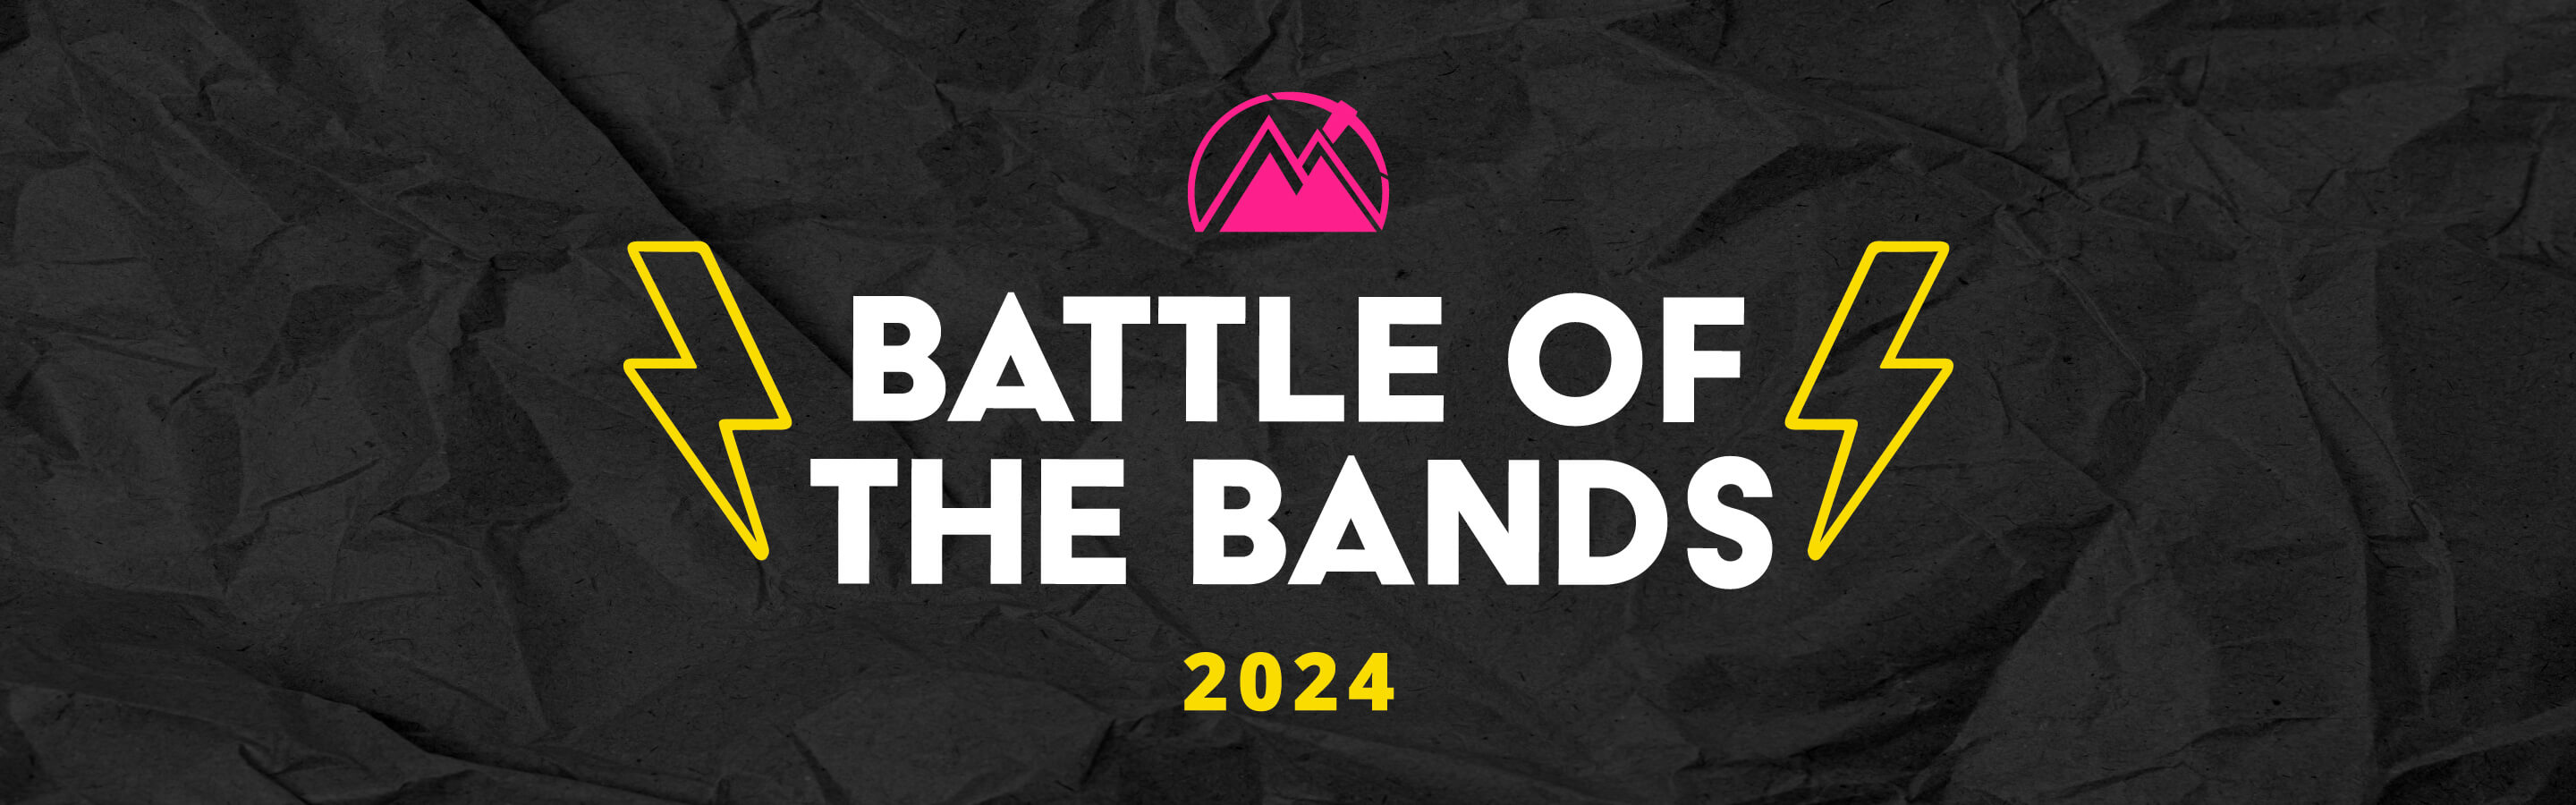 GET READY FOR BATTLE OF THE BANDS 2024!